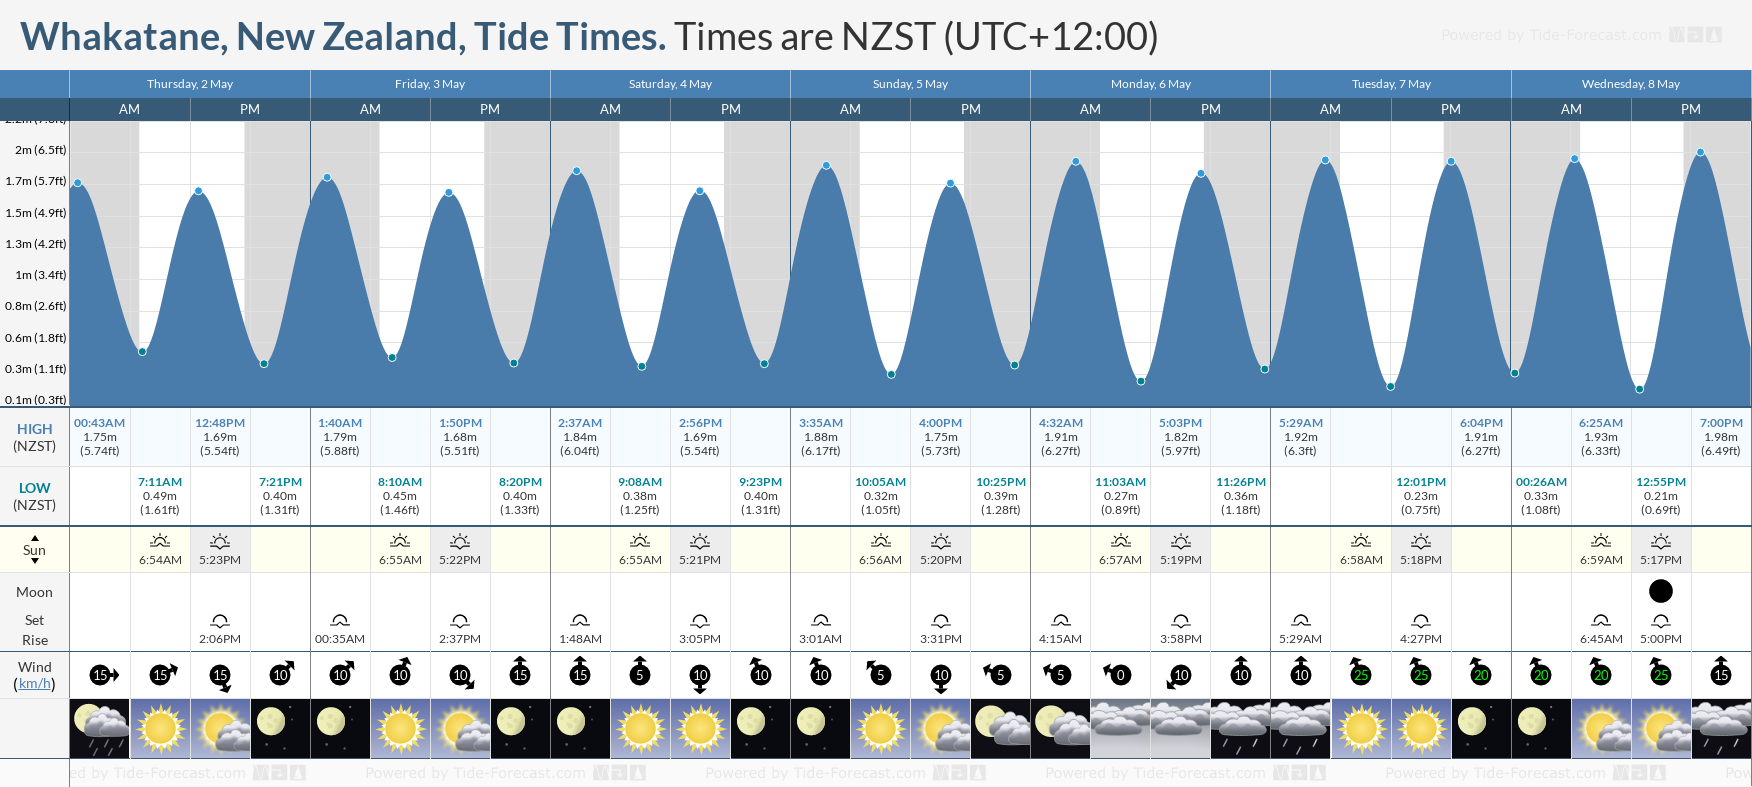 Whakatane, New Zealand Tide Chart including high and low tide times for the next 7 days